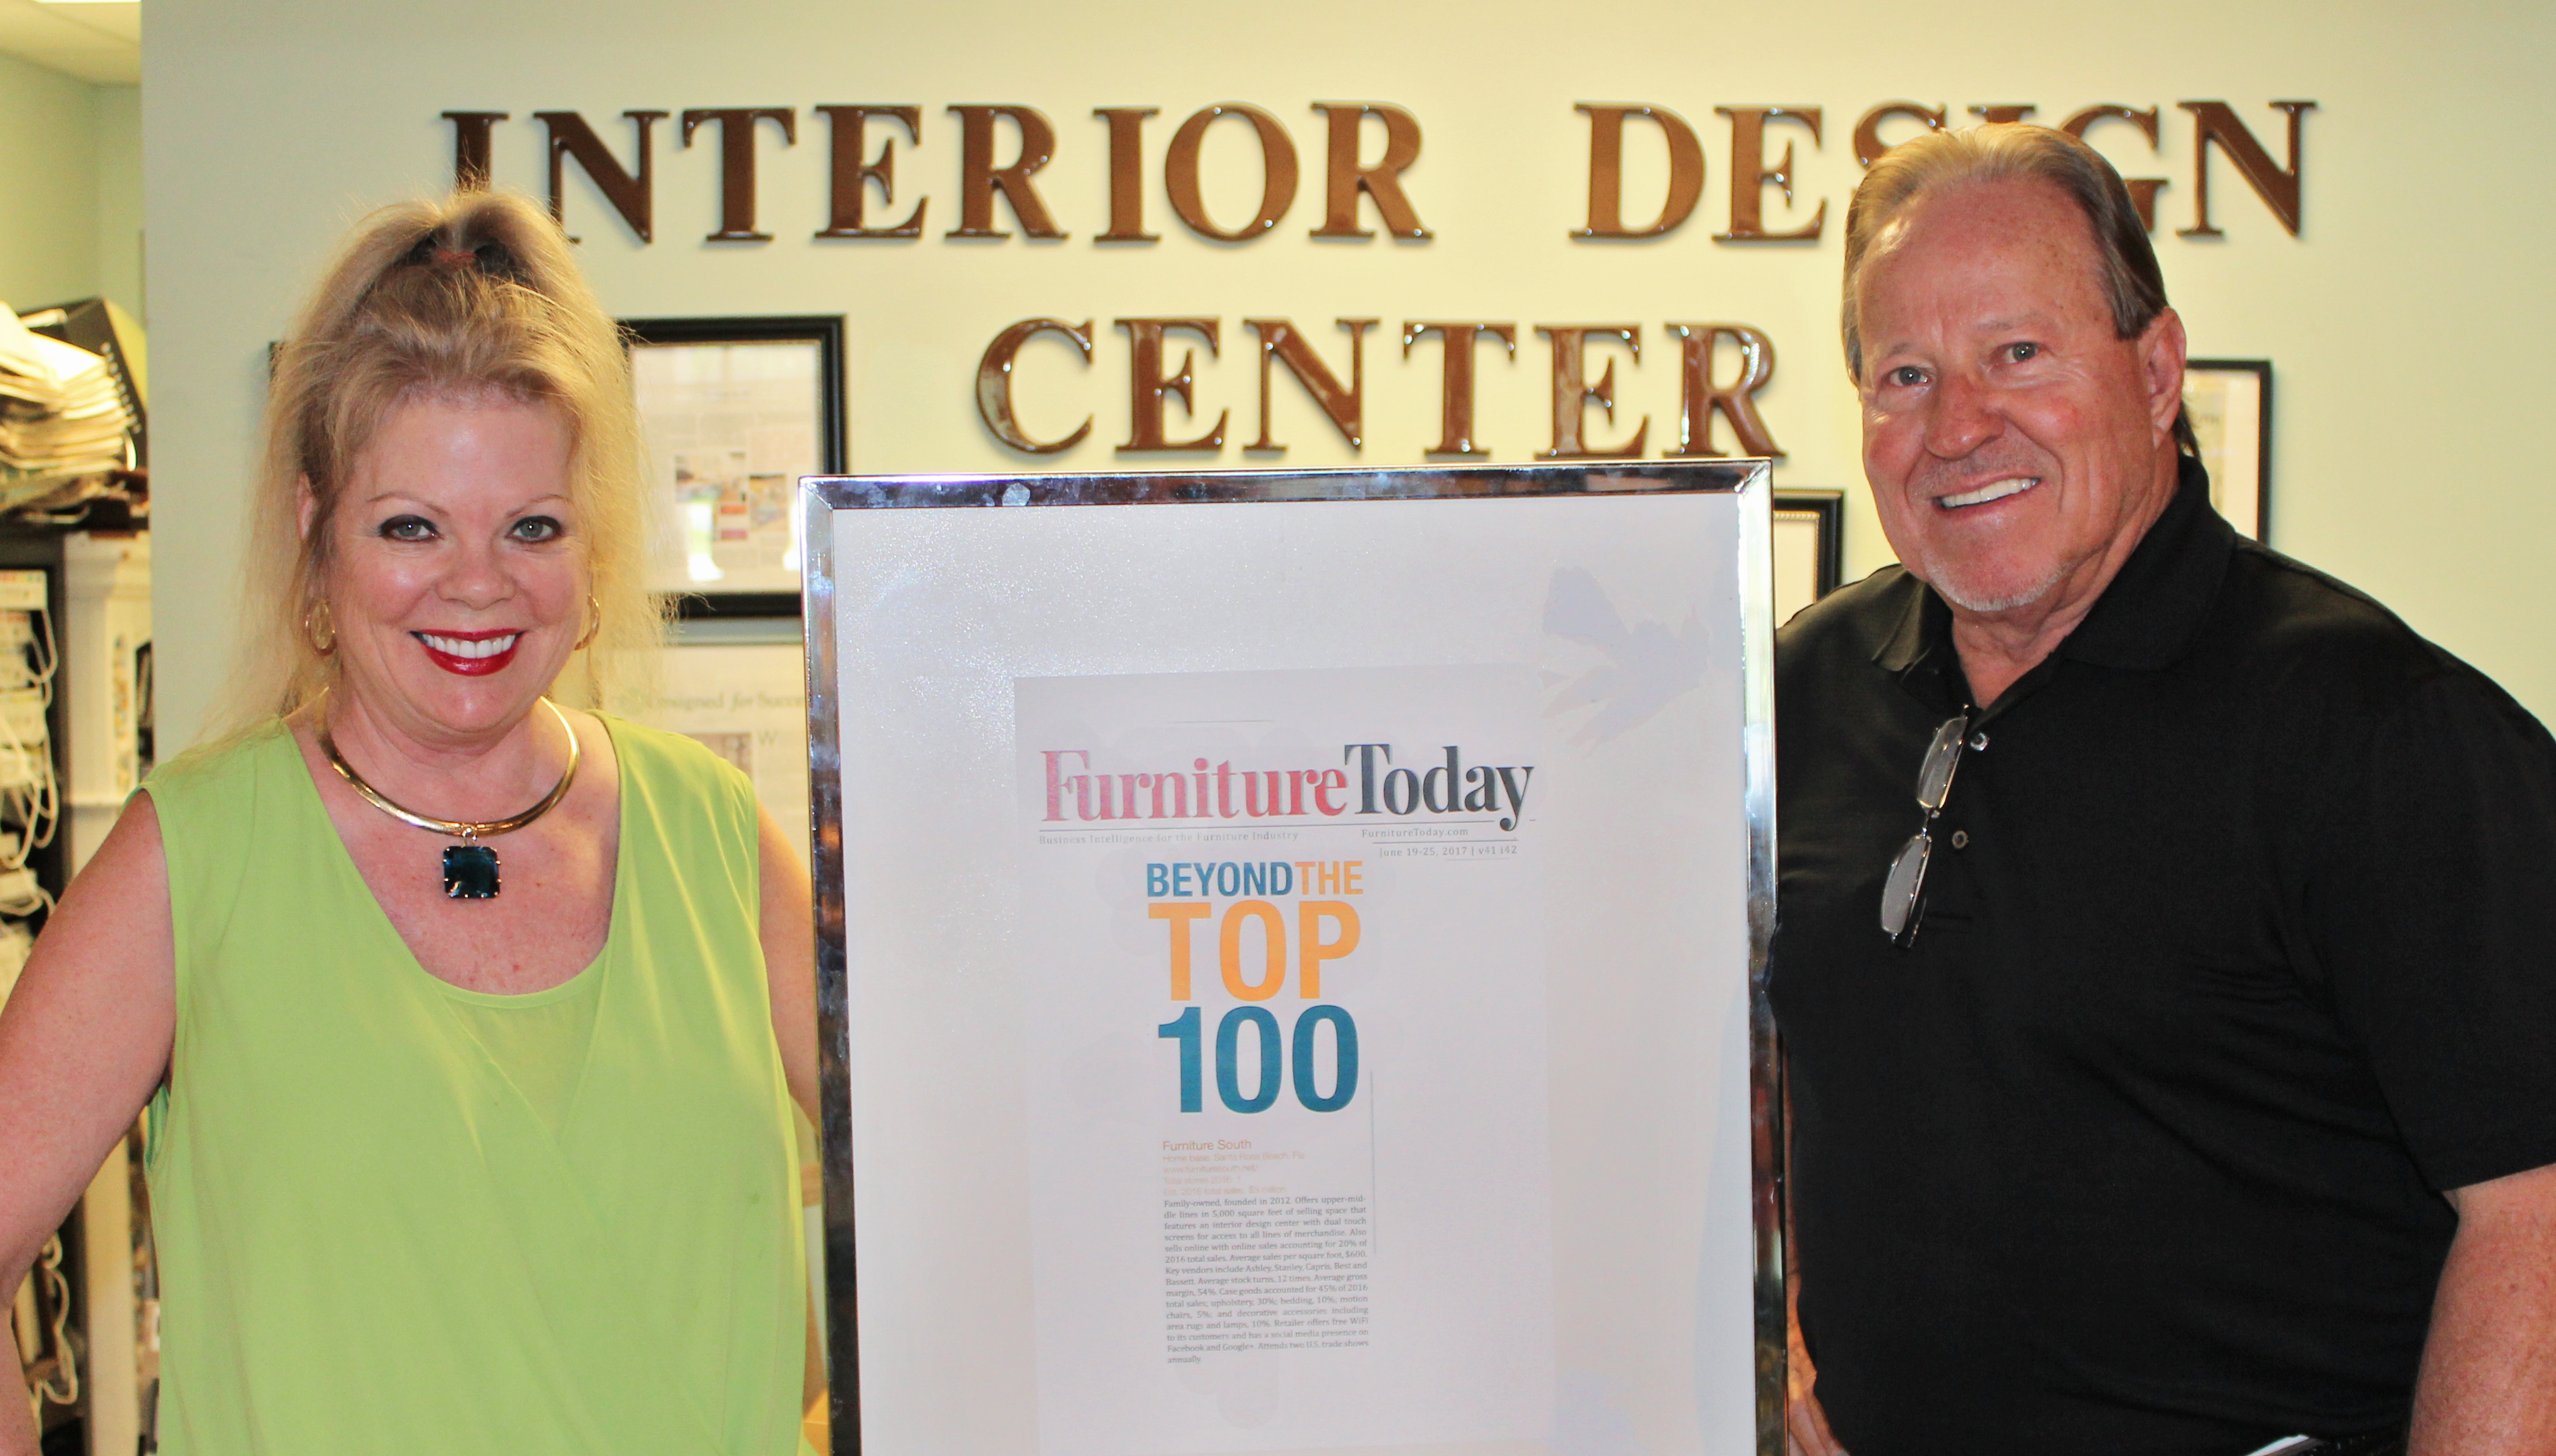 Furniture South Included in Top 100